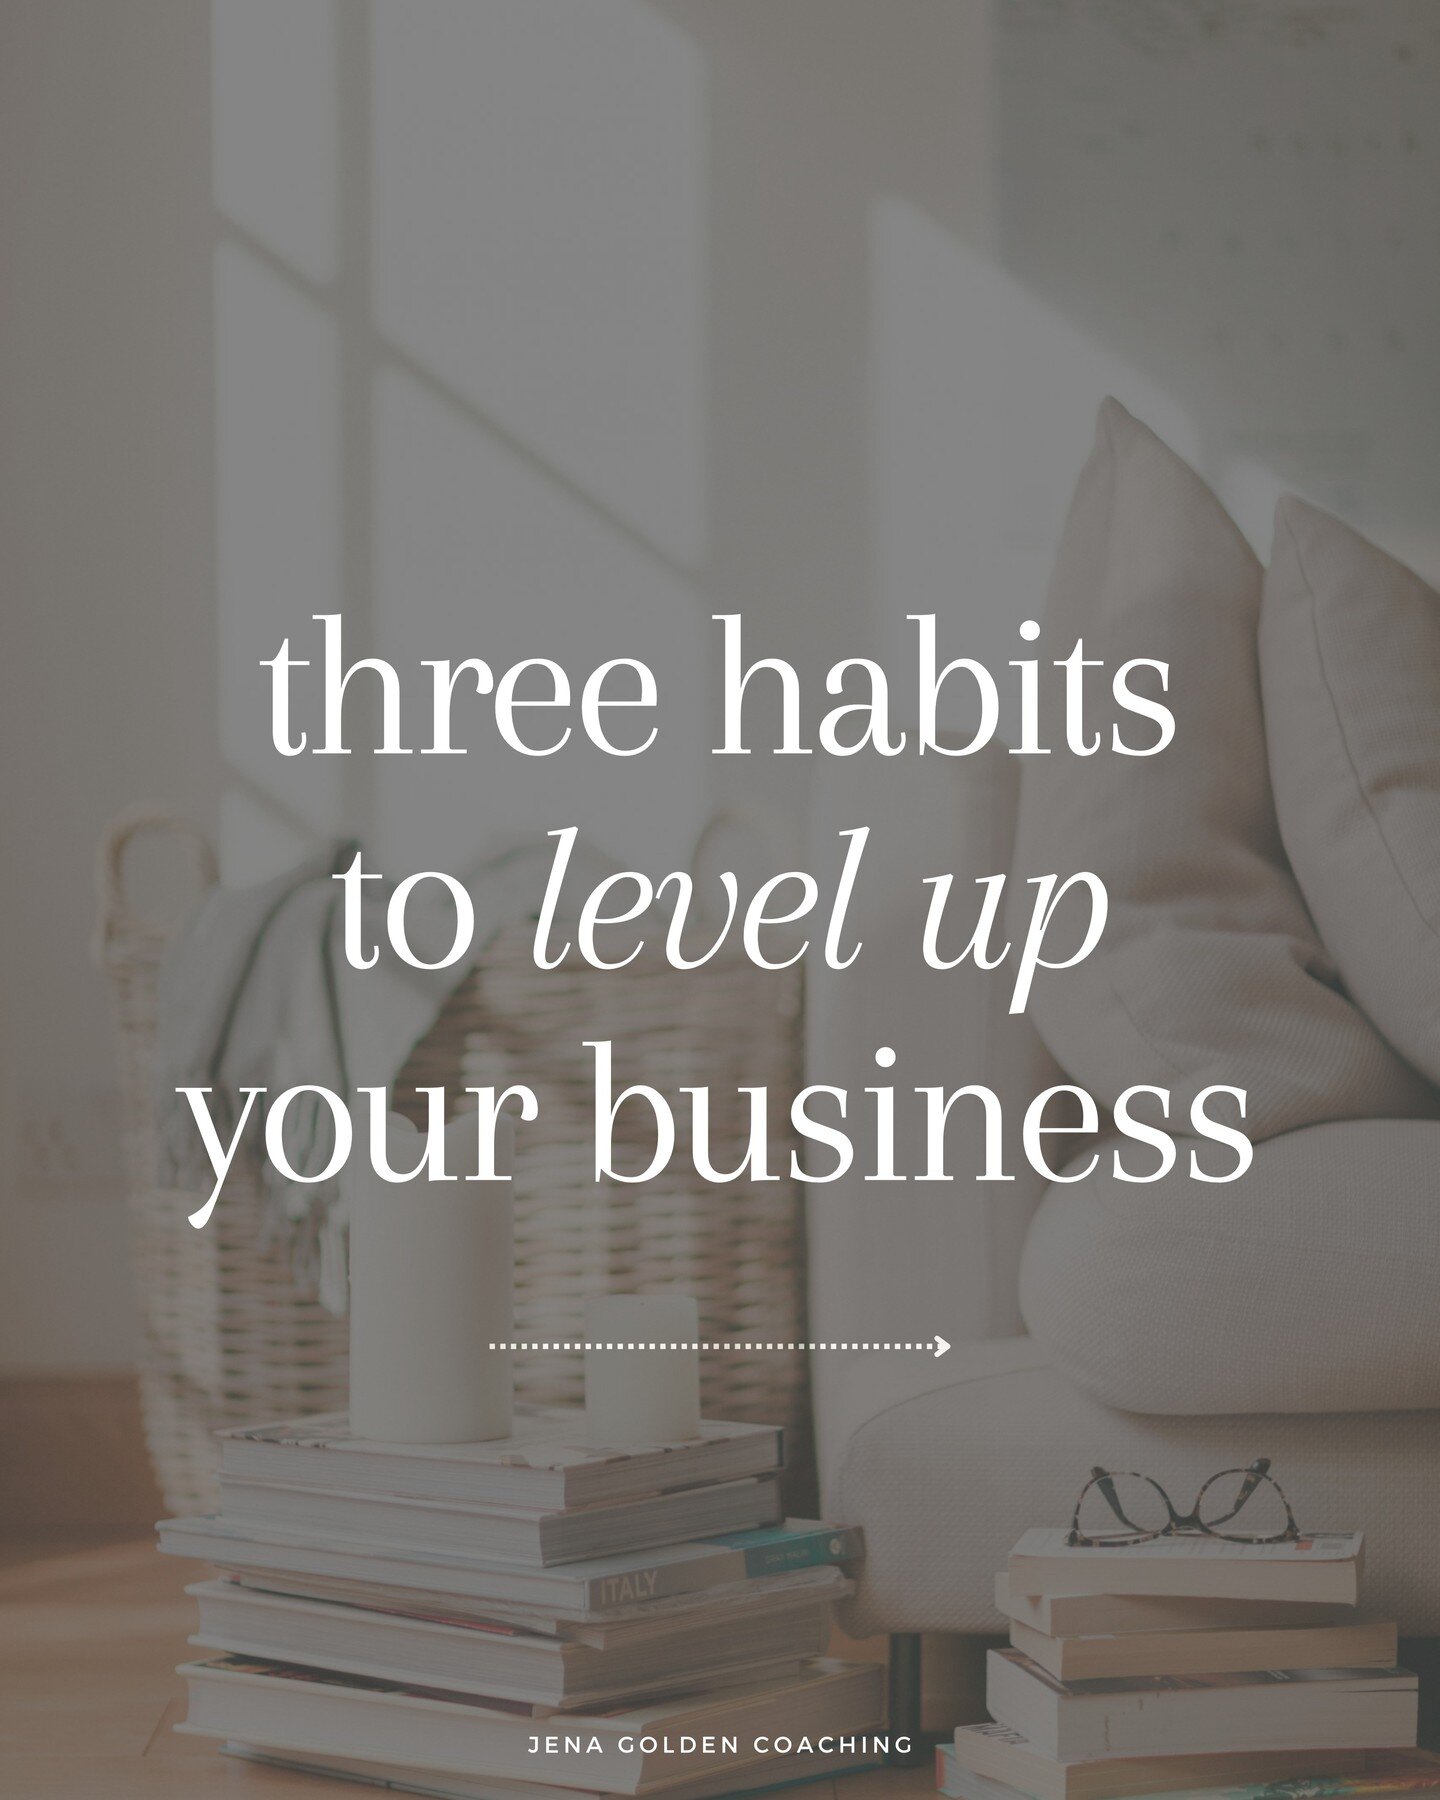 It's so easy as entrepreneurs to jump right into work first thing in the morning. I used to make this mistake early on in my business. 

I hit burnout real quick.

Here's 3 habits that have helped me level up my online business and myself over the la